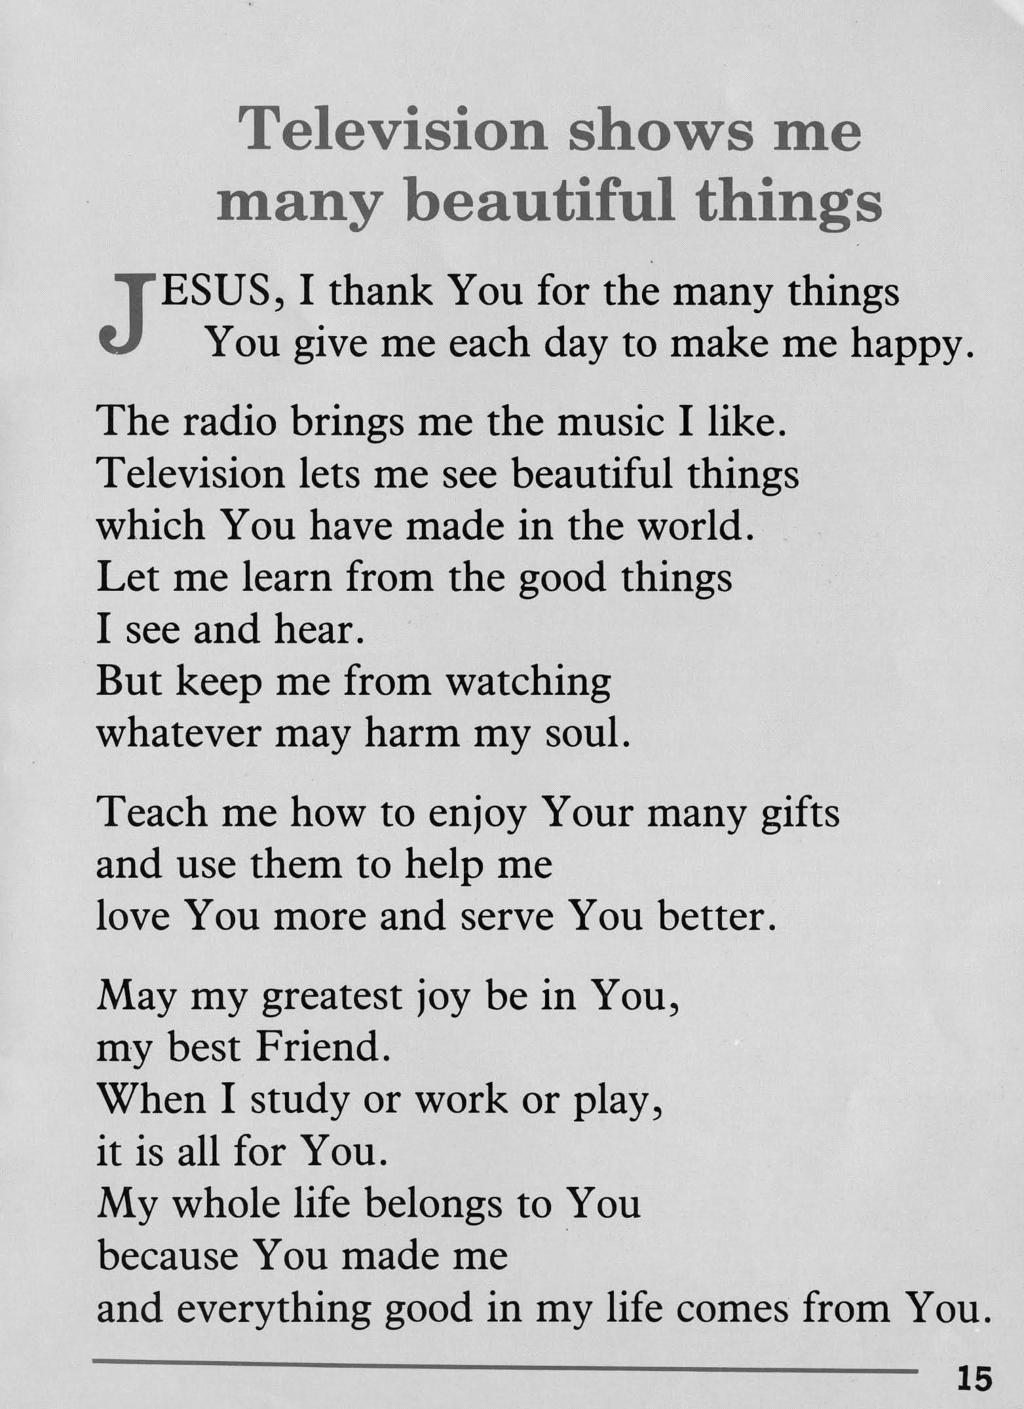 J ESUS, Television shows me many beautiful things I thank You for the many things You give me each day to make me happy. The radio brings me the music I like.